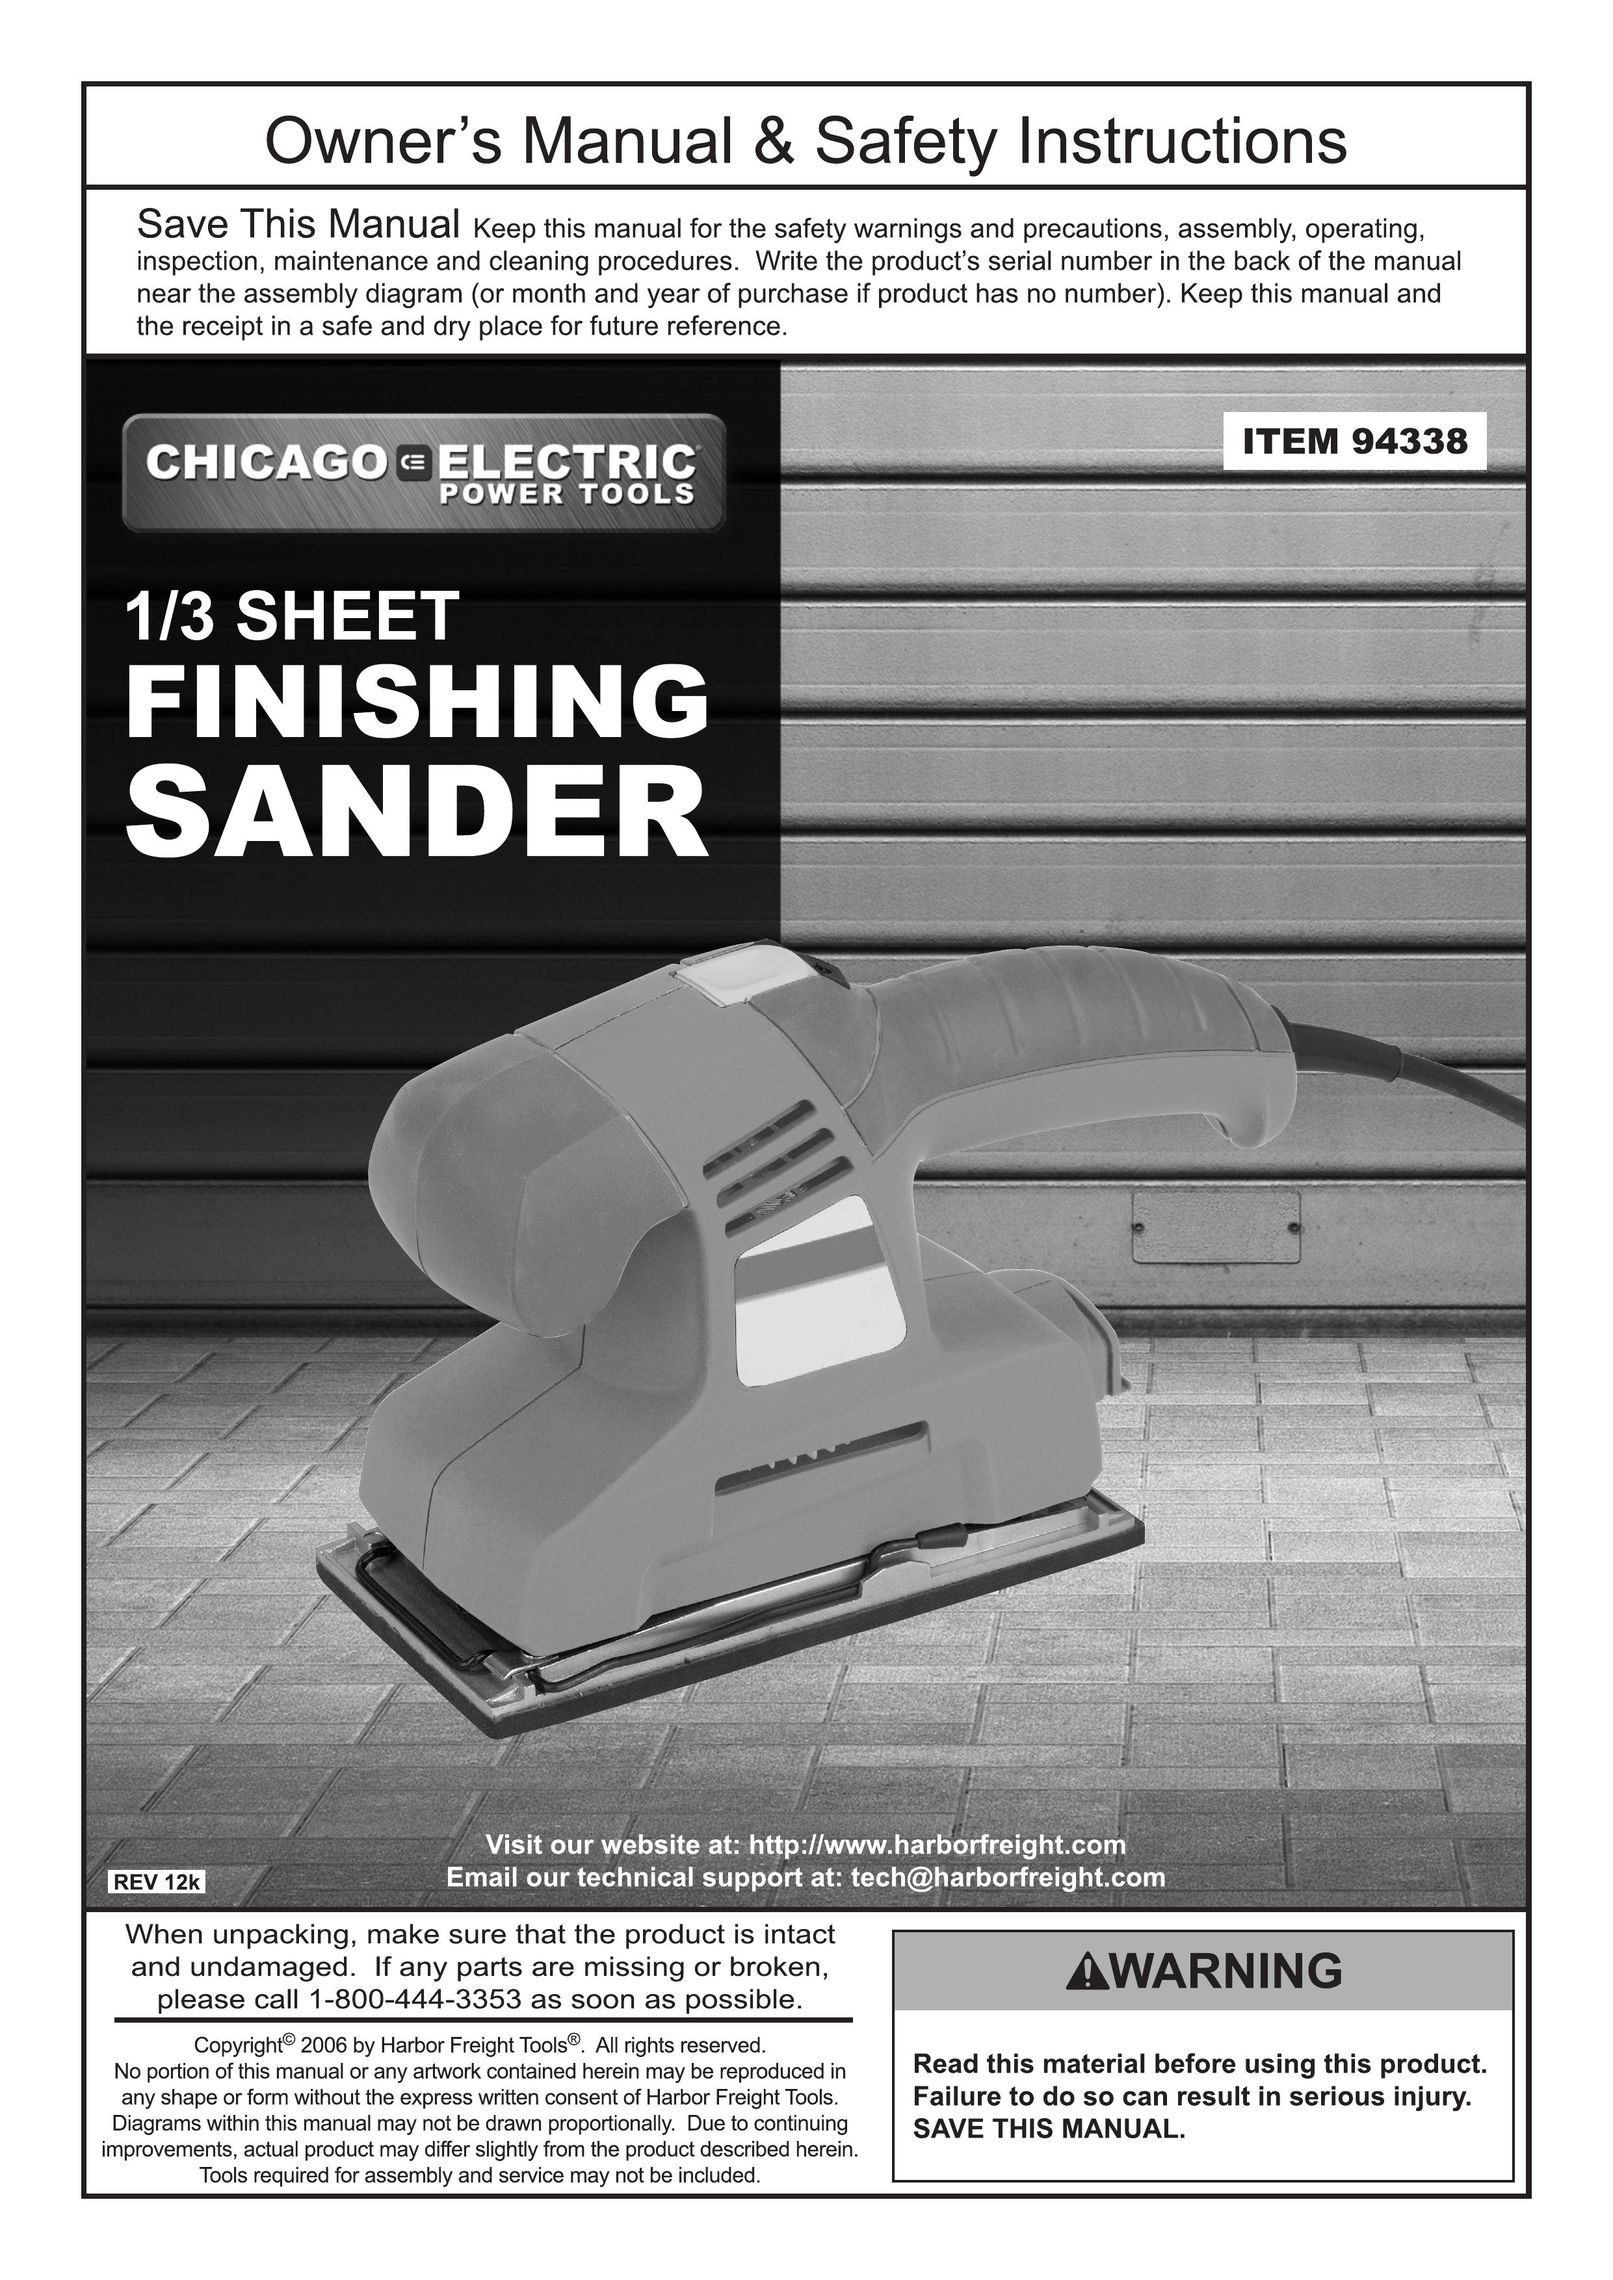 Chicago Electric 94338 Cordless Sander User Manual